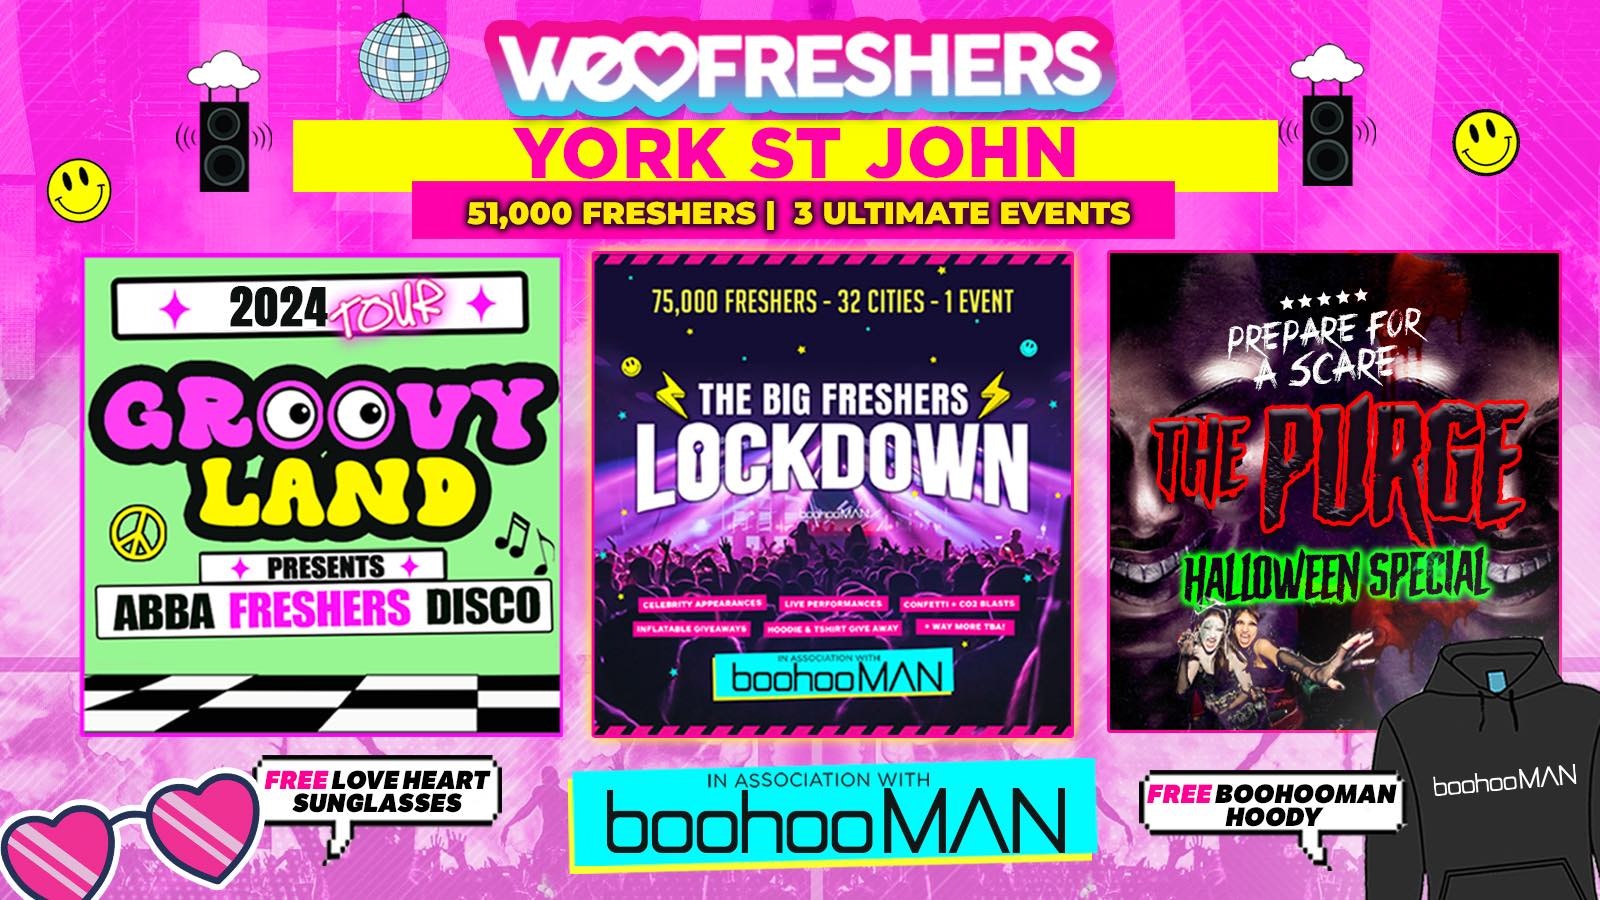 WE LOVE YORK ST. JOHNS FRESHERS 2024 in association with boohooMAN ❗FREE BOOHOOMAN HOODIE TODAY ONLY❗